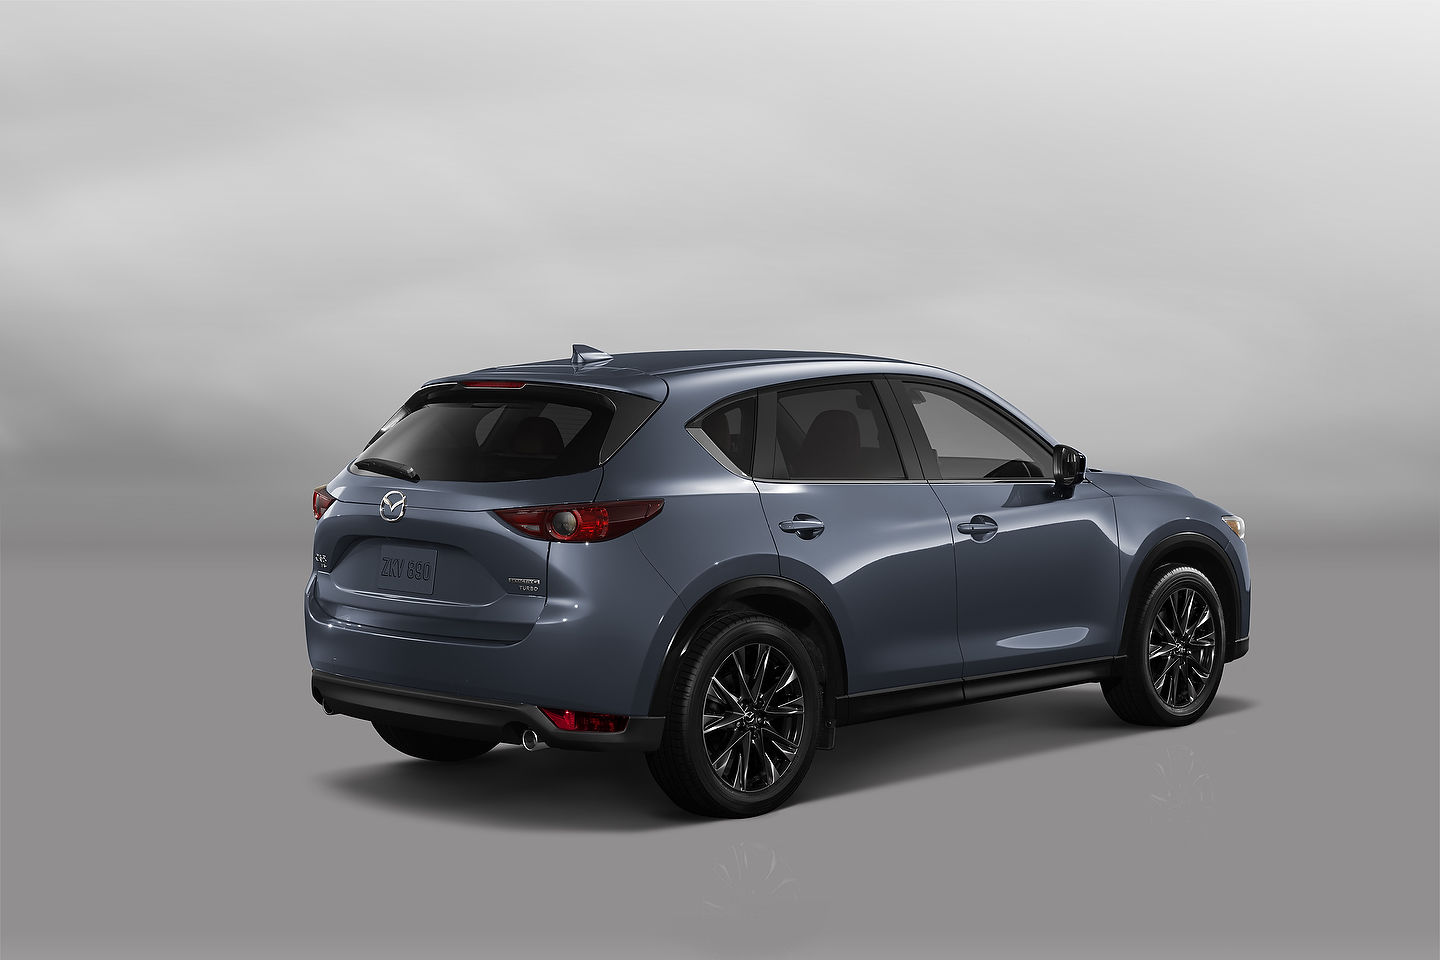 2021.5 Mazda CX-5 Trims, Specs, and Pricing